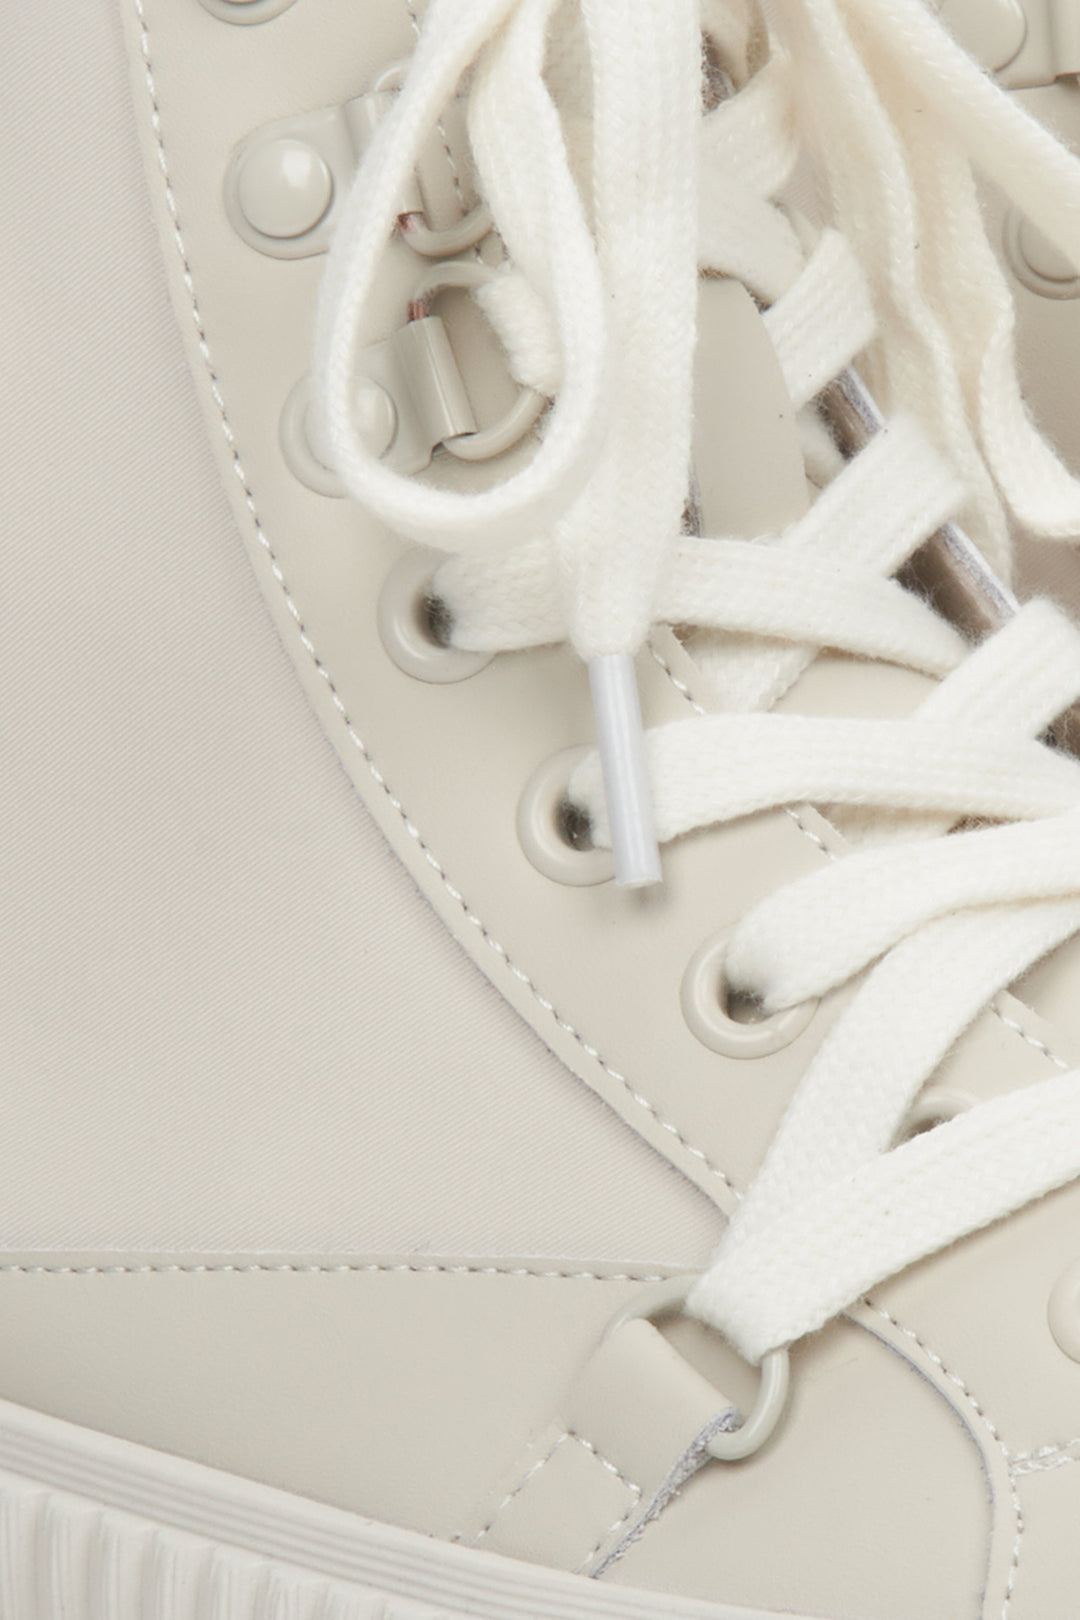 Women's white leather sneakers by Estro - close-up on details.